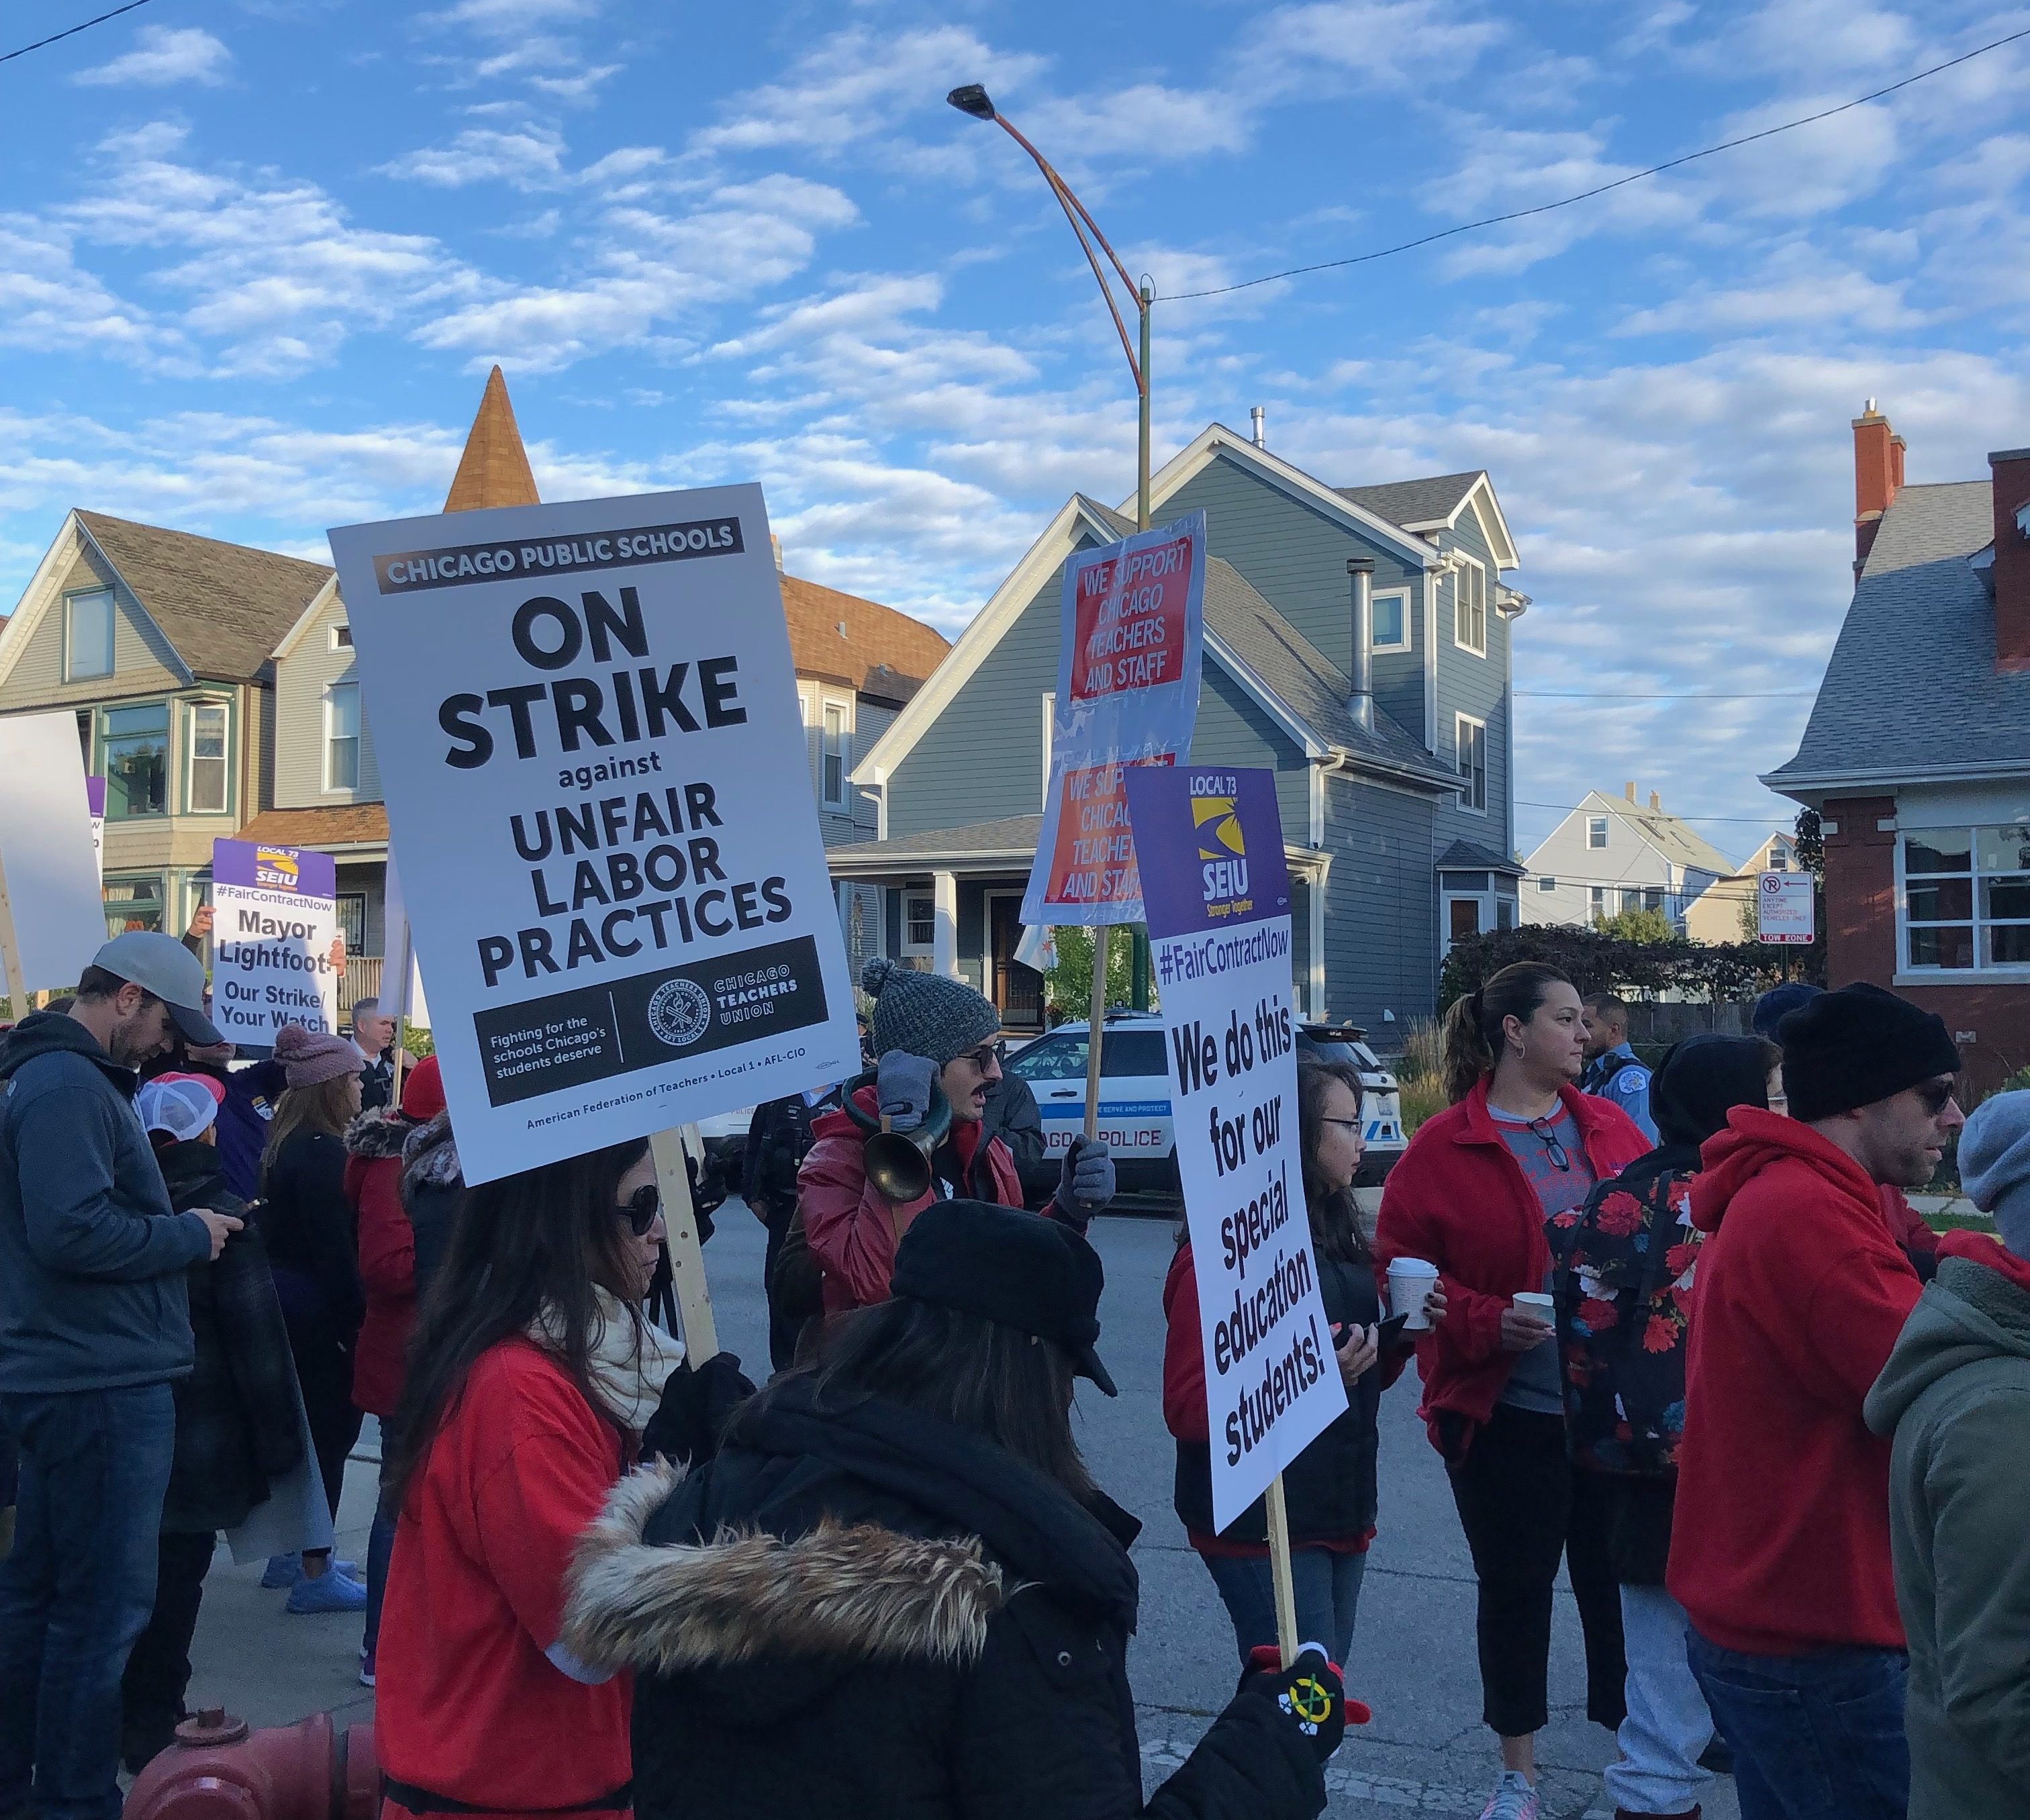 Chicago Teachers Union members picket Oct. 17, 2019, the first day of a citywide teachers strike.